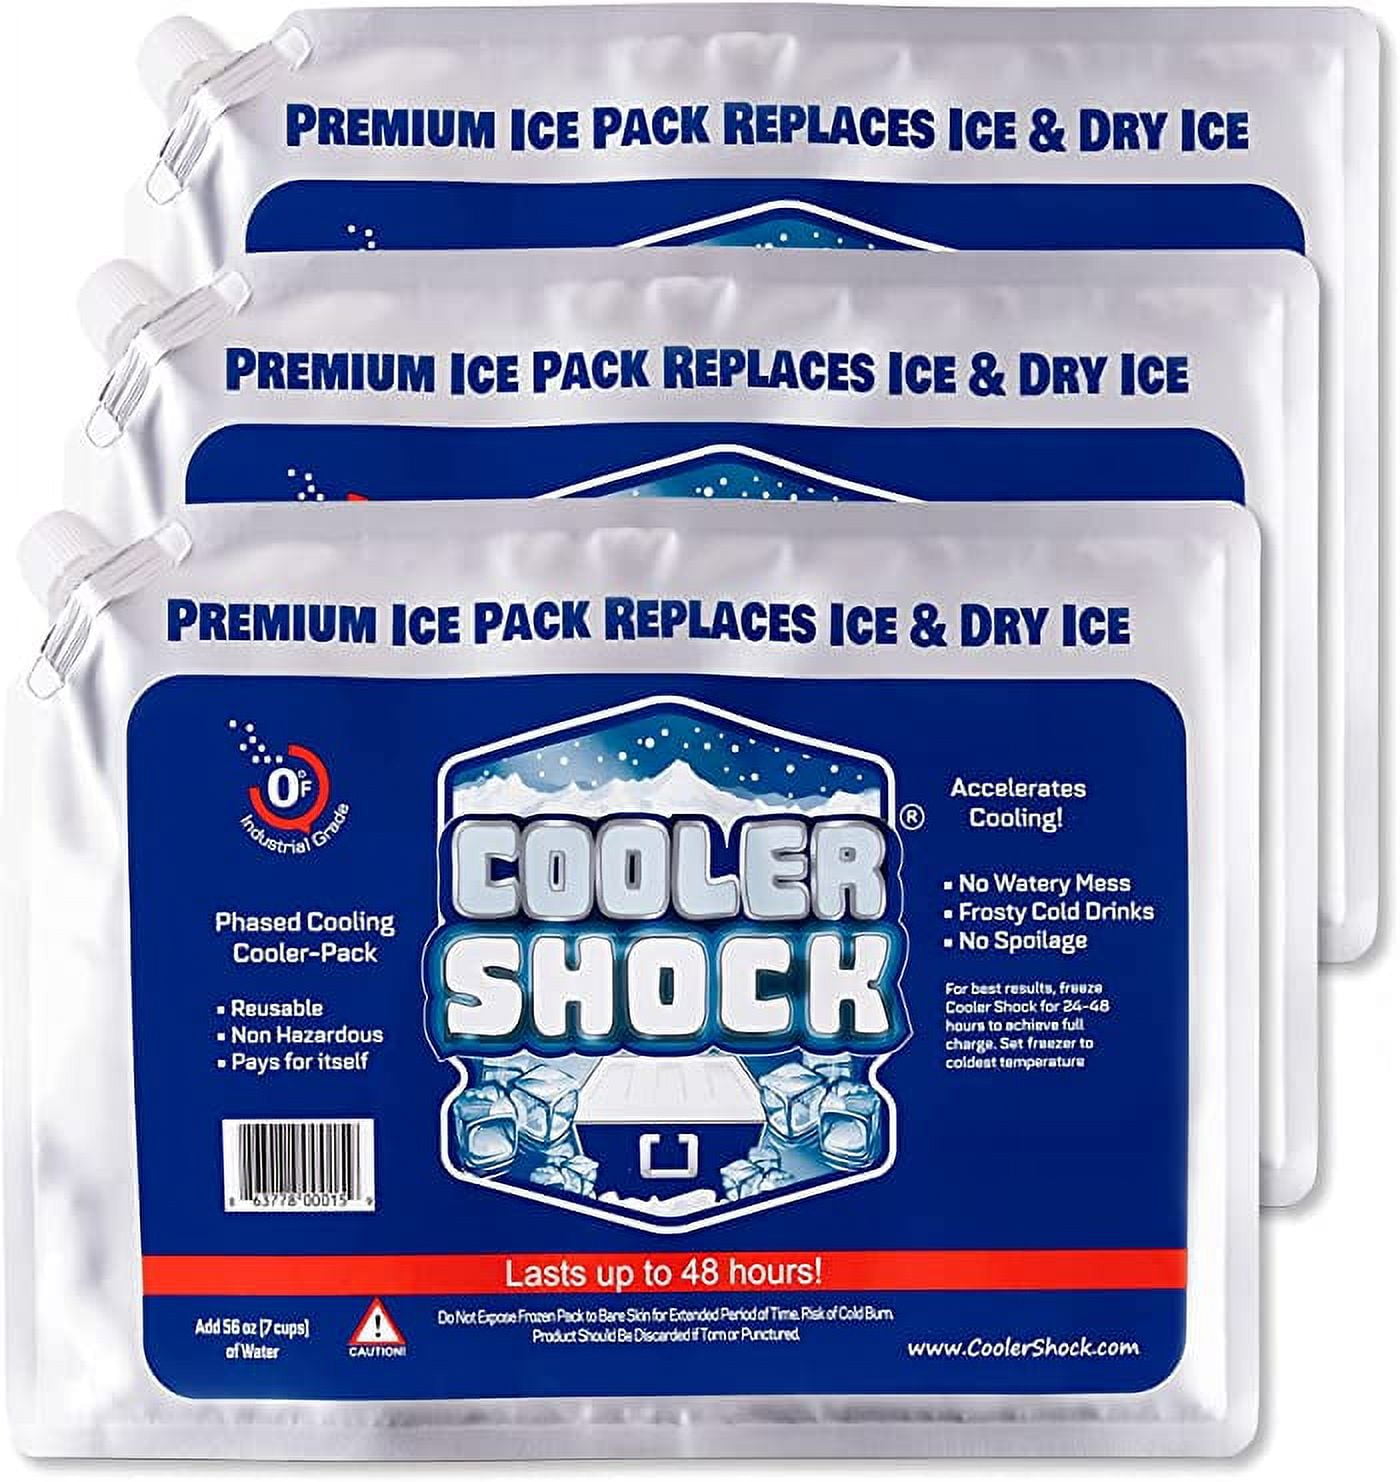 Large Ice Packs for Coolers - Reusable Ice Block for Lunch Box - Long  Lasting Reusable Cooler Ice Pack for Camping, Beach, Picnics, Fishing and  More